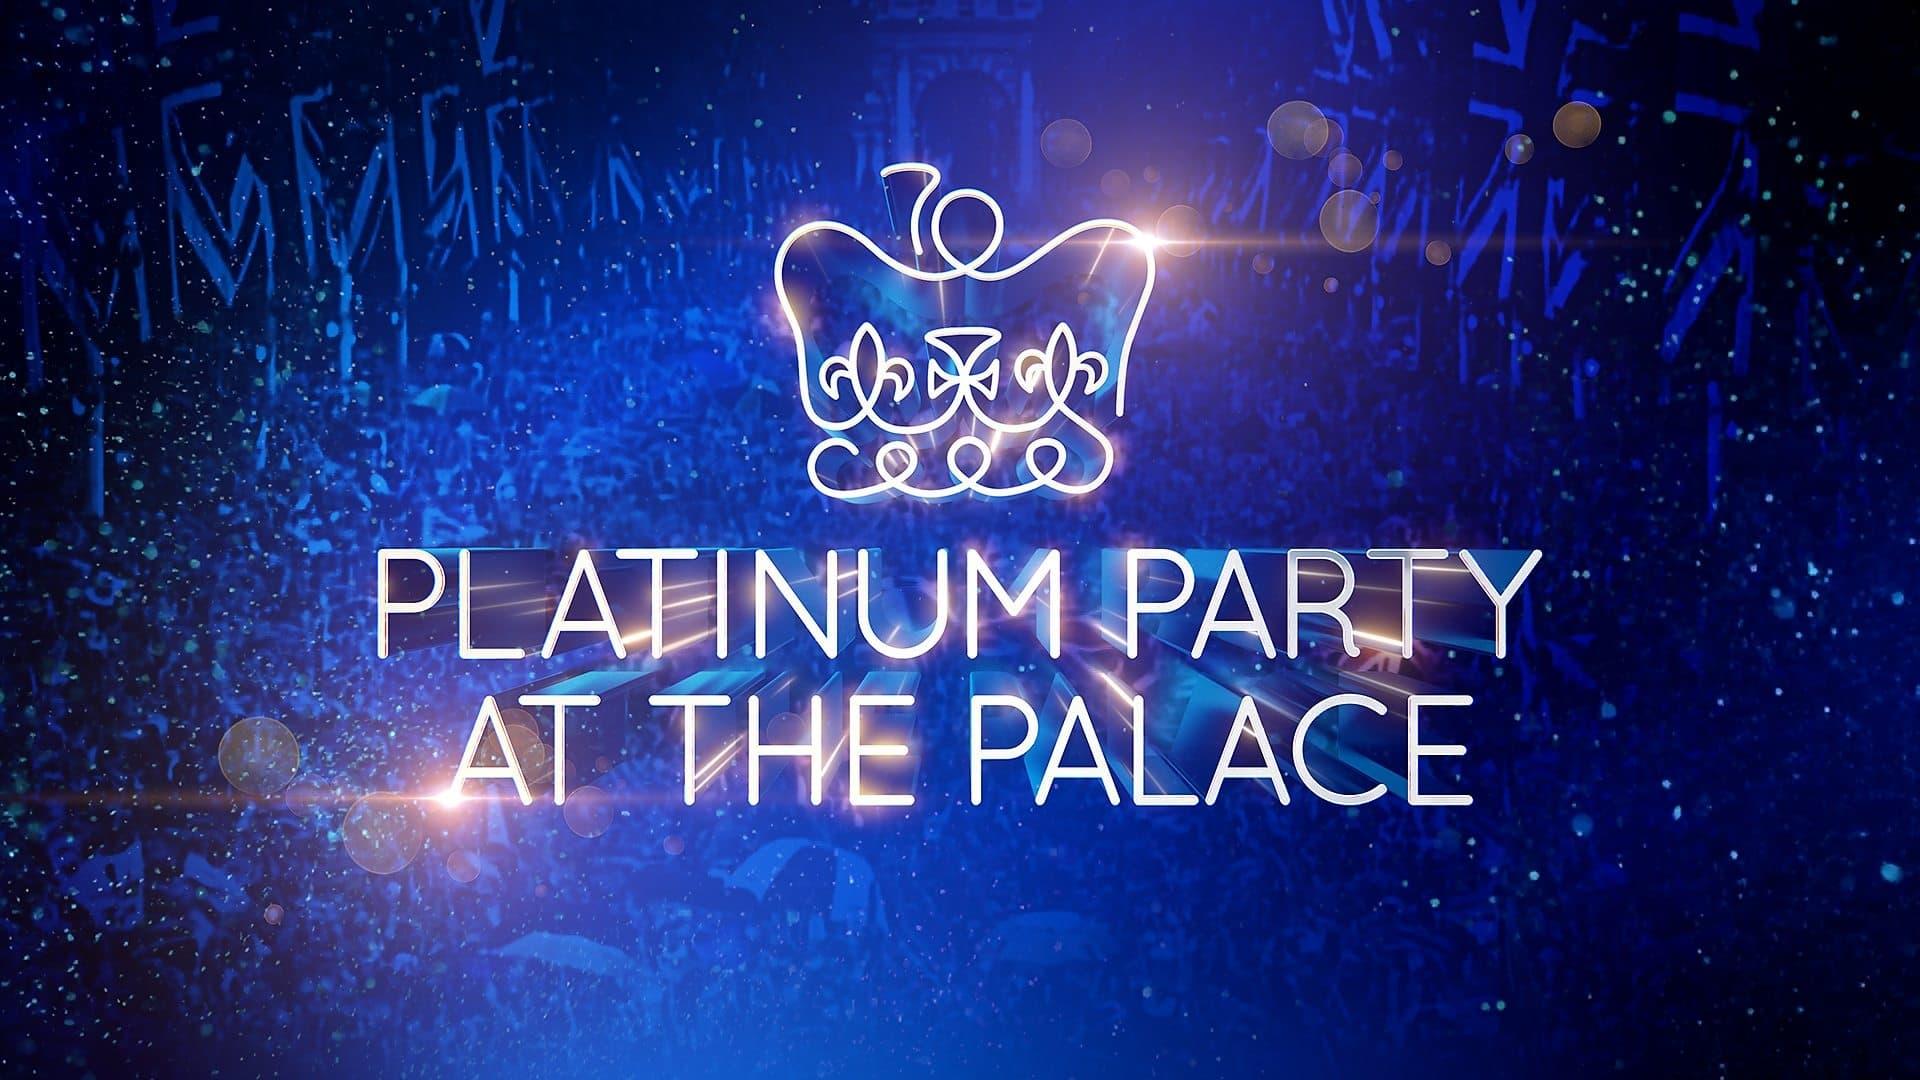 Platinum Party at the Palace backdrop